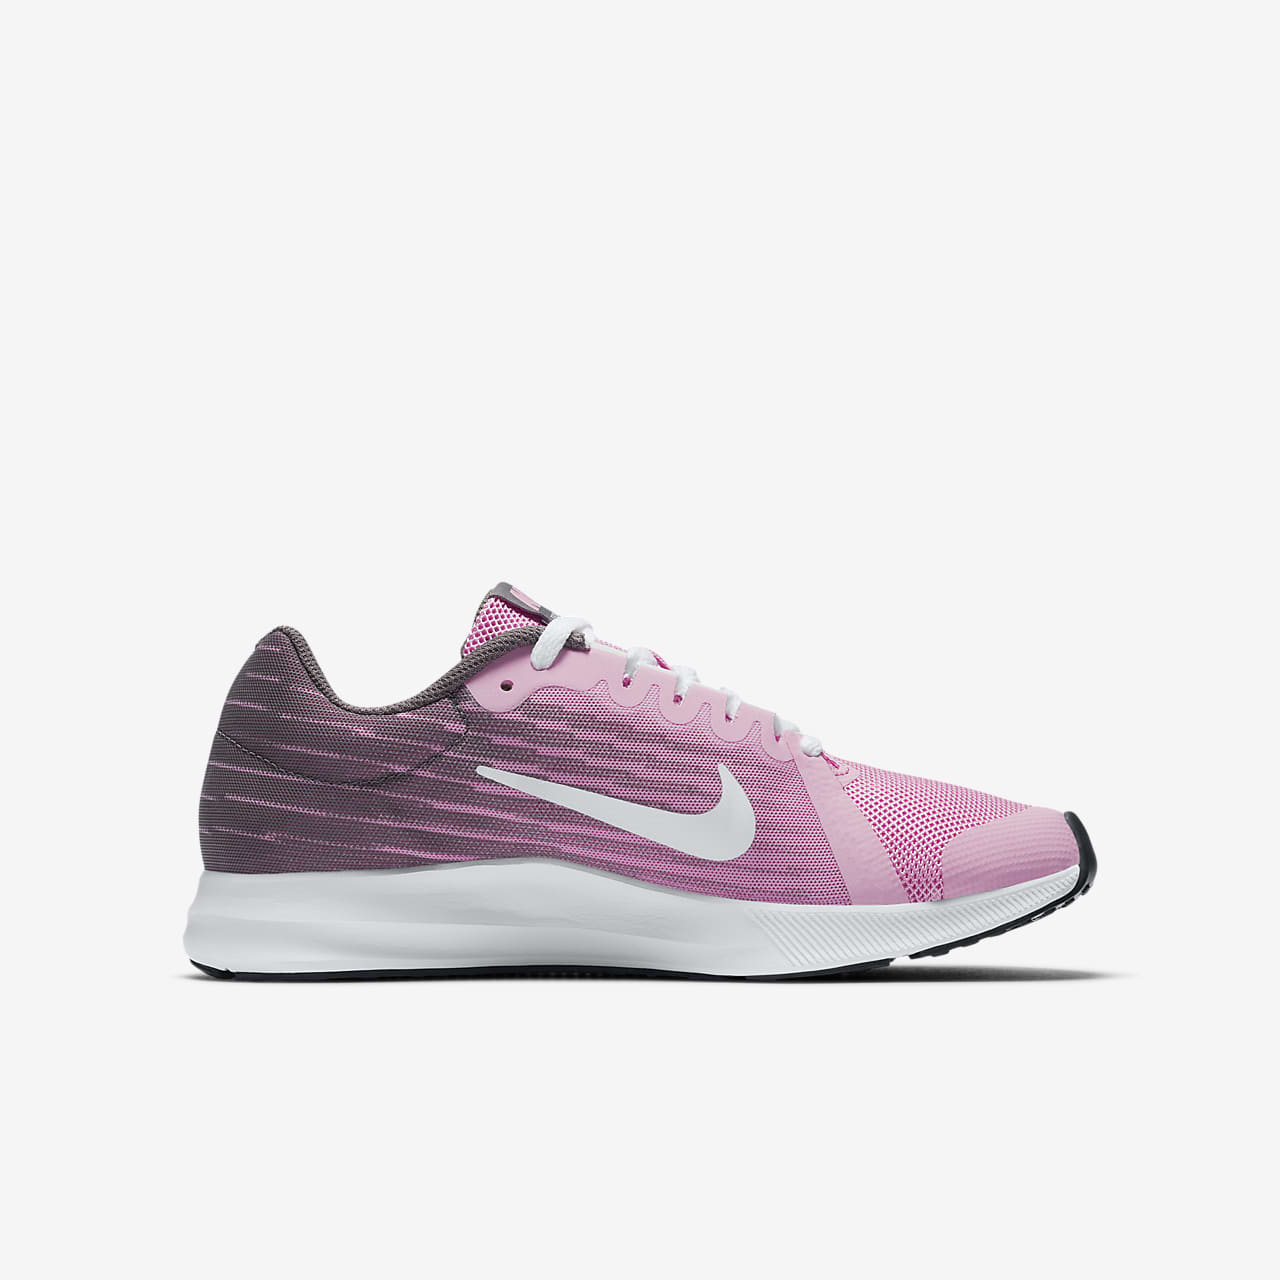 nike downshifter 8 good for running